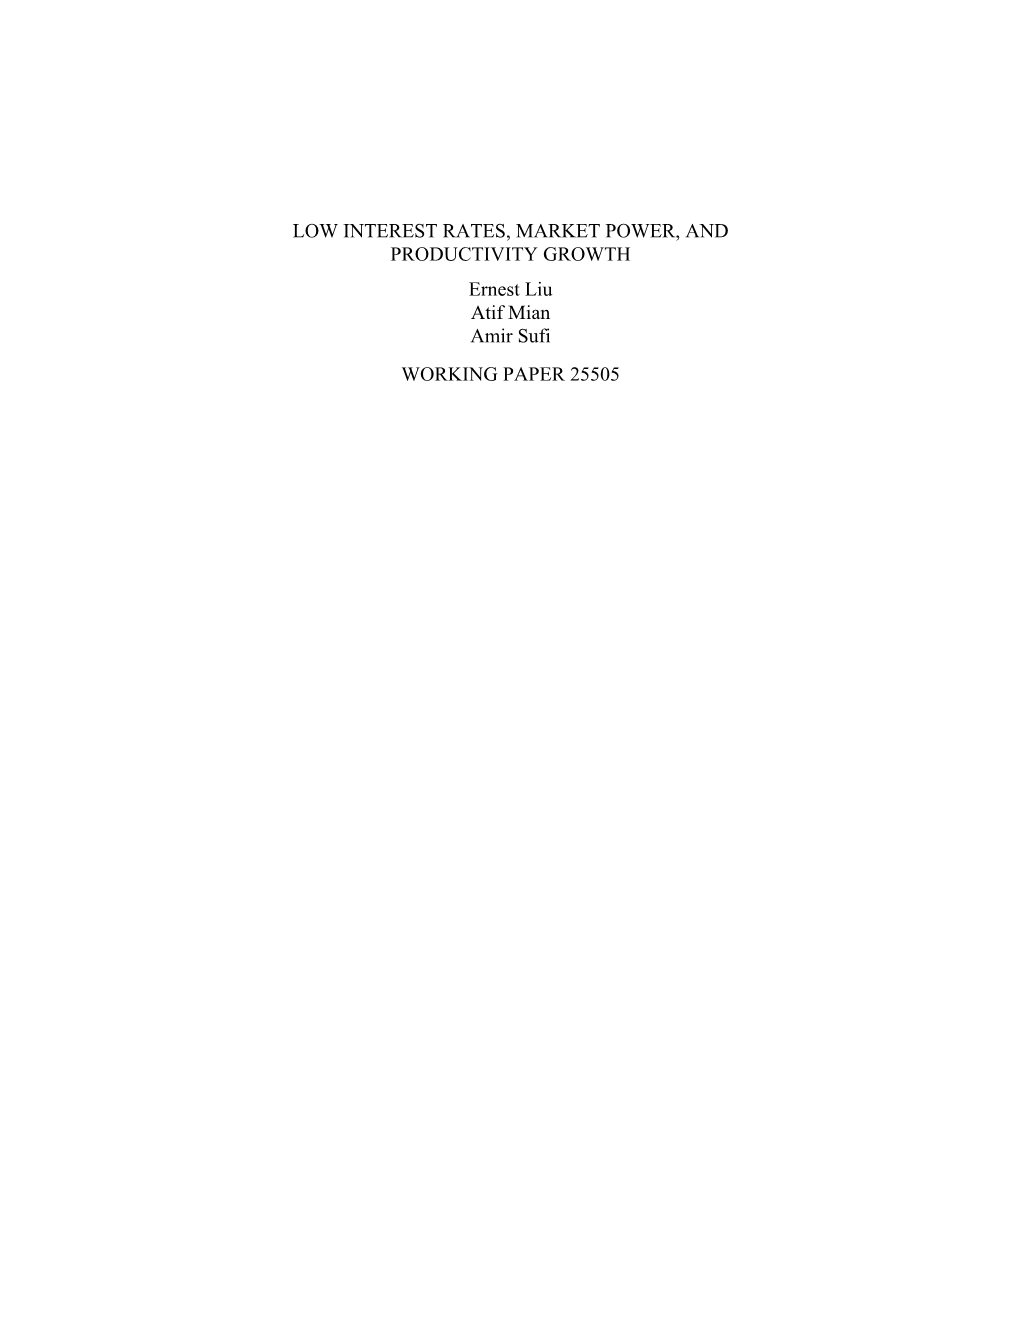 LOW INTEREST RATES, MARKET POWER, and PRODUCTIVITY GROWTH Ernest Liu Atif Mian Amir Sufi WORKING PAPER 25505 NBER WORKING PAPER SERIES